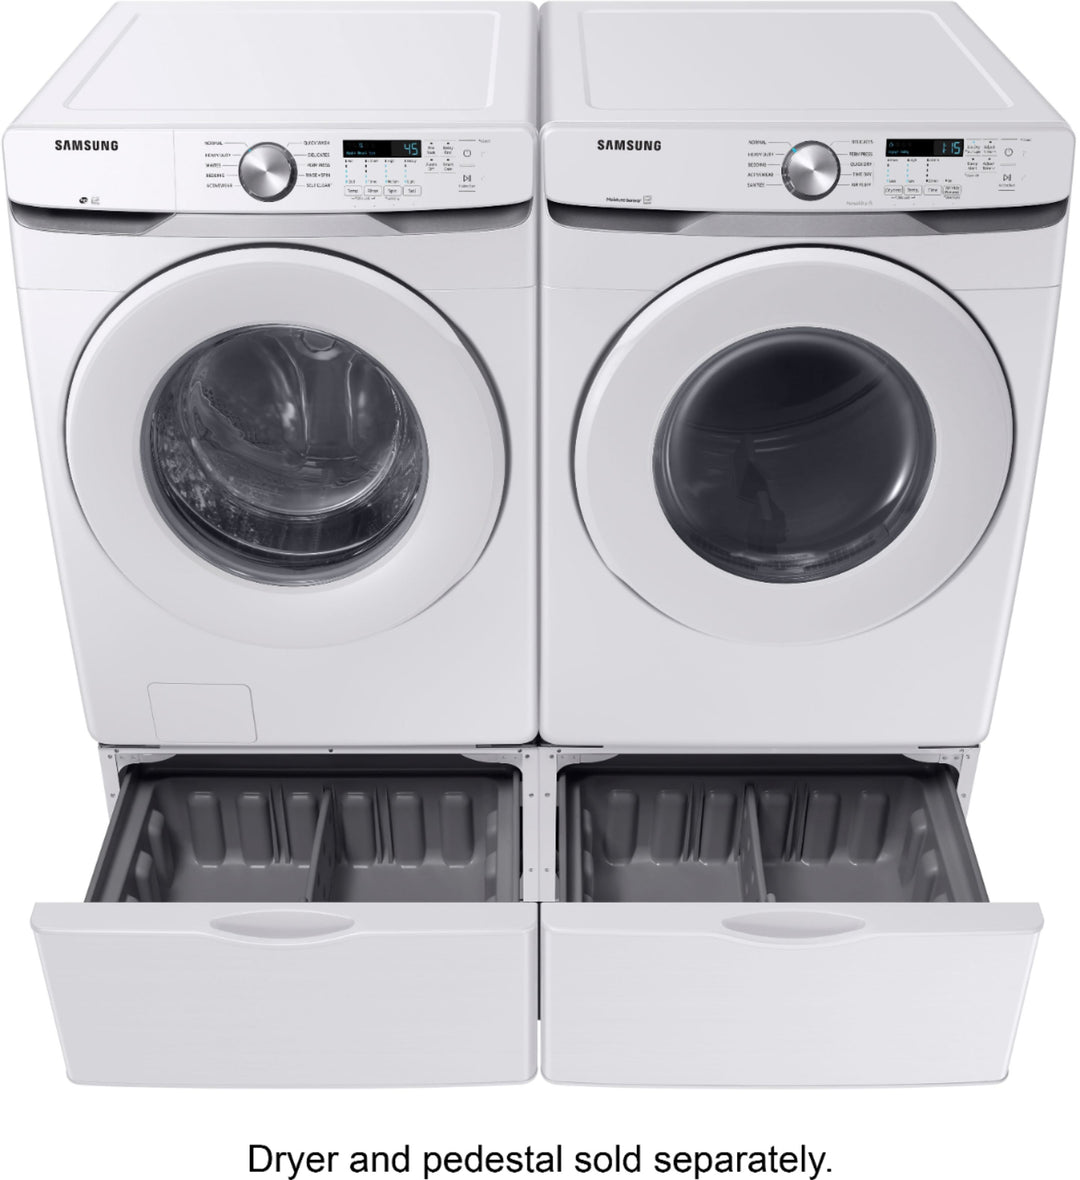 Samsung - 4.5 Cu. Ft. High Efficiency Stackable Front Load Washer with Vibration Reduction Technology+ - White_13